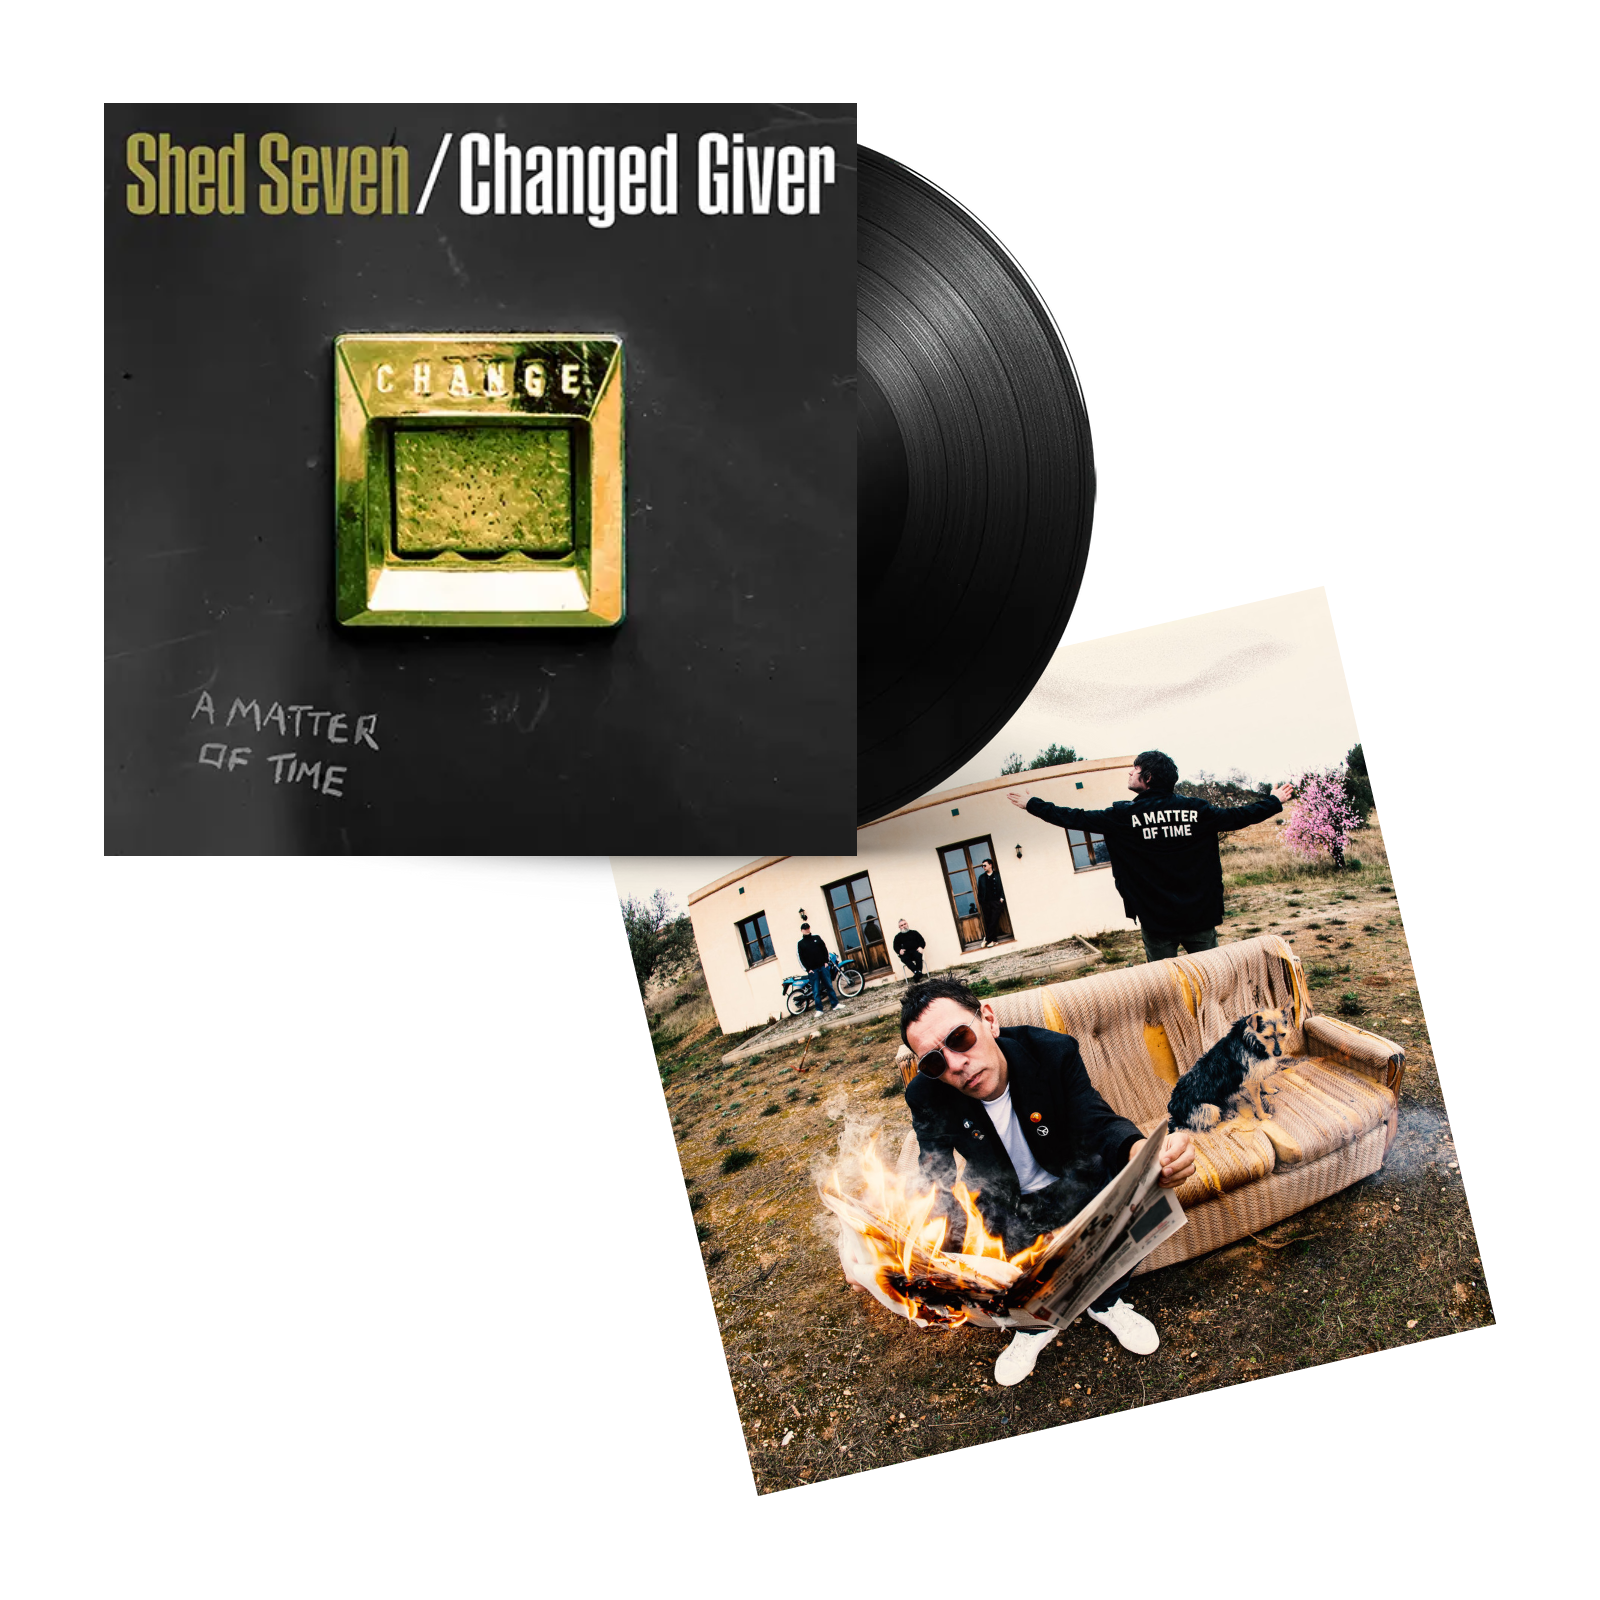 Changed Giver Limited Vinyl LP & A Matter Of Time Signed Print